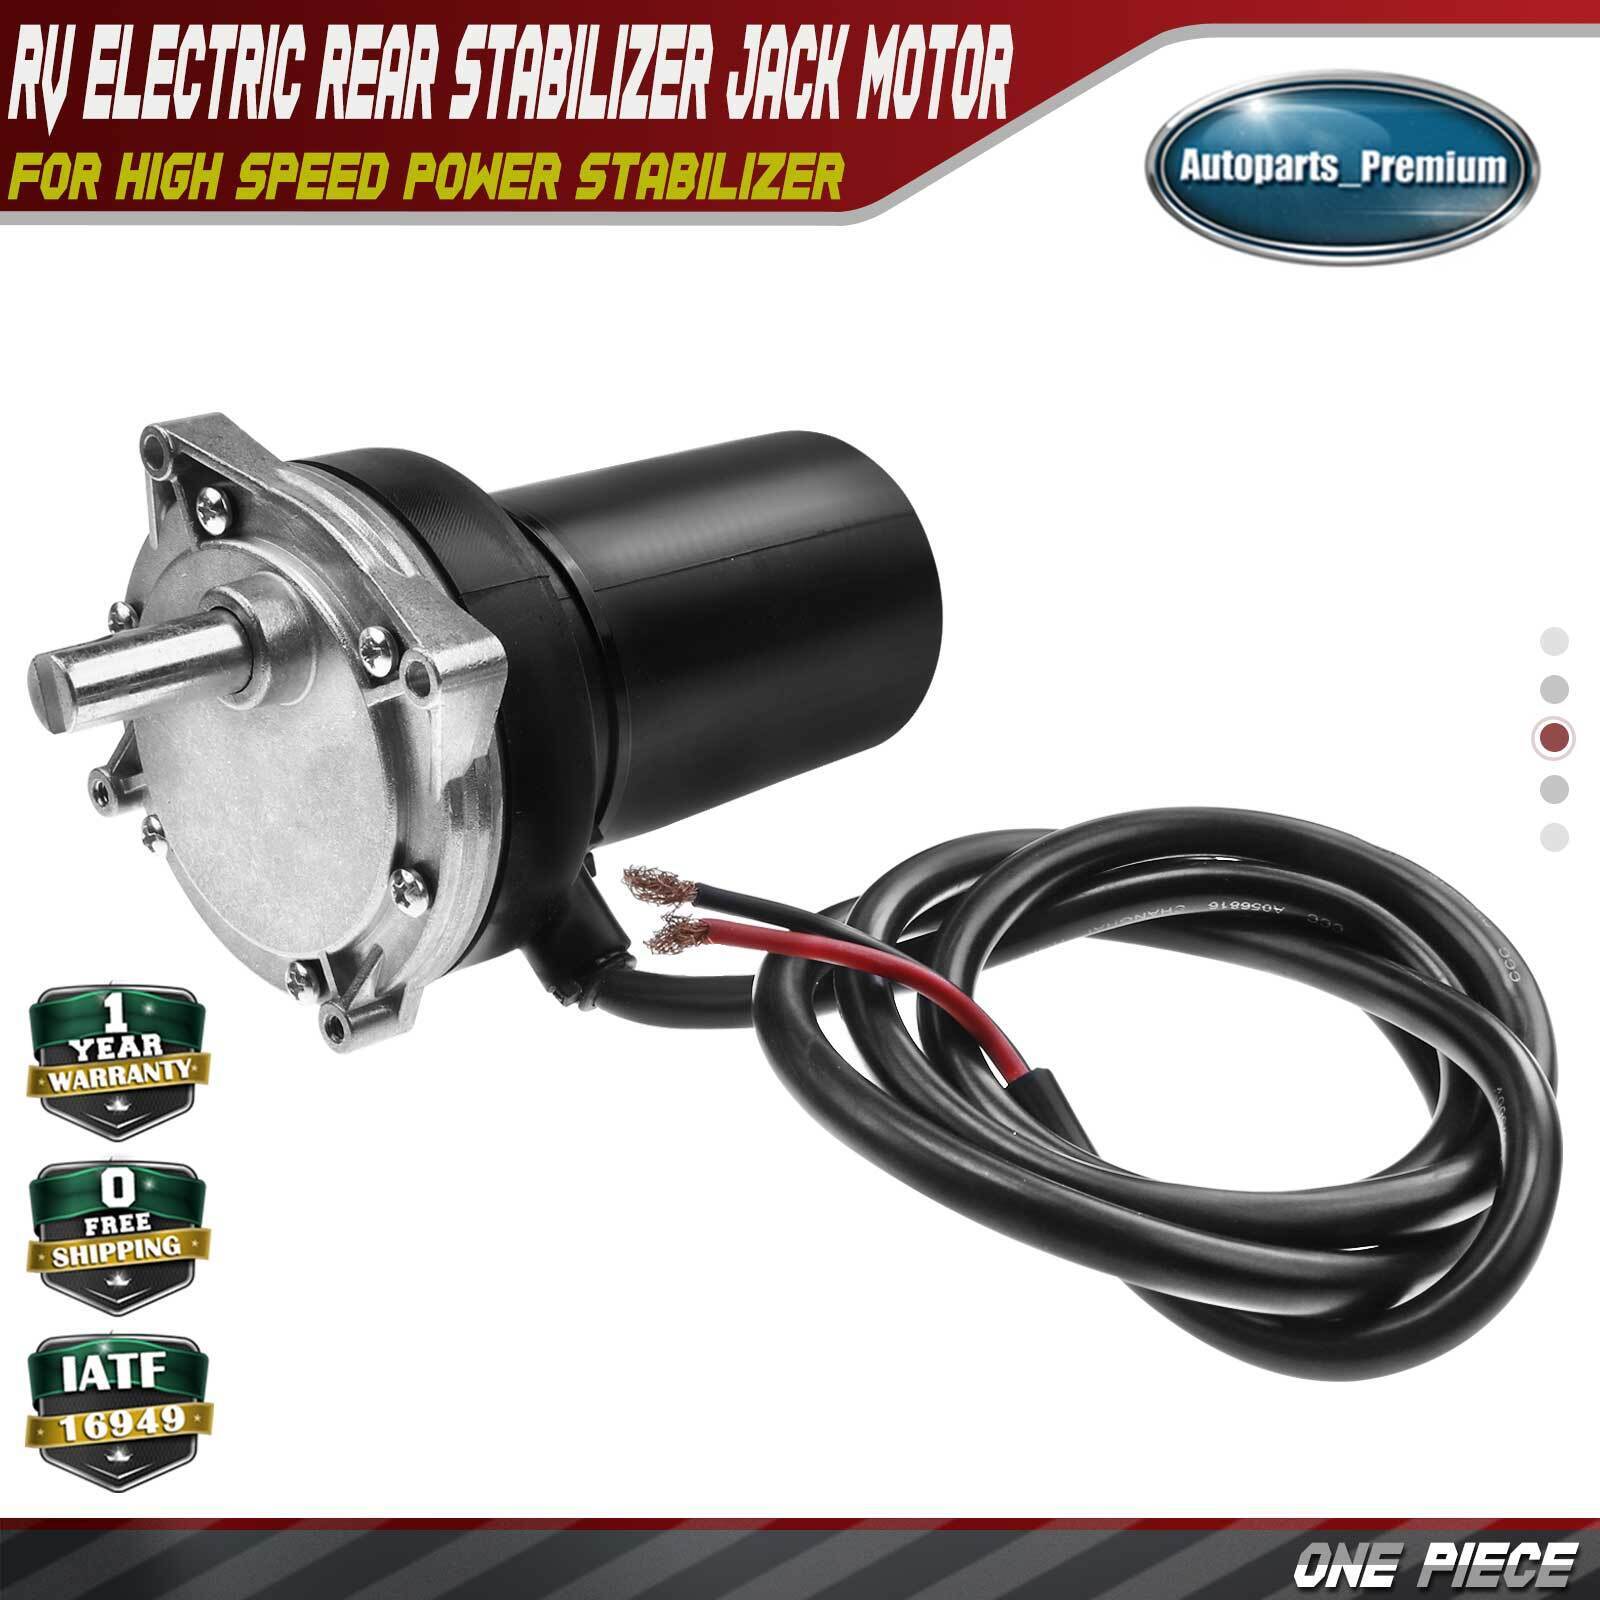 New RV Electric Rear Stabilizer Jack Motor for High Speed Power Stabilizer Model